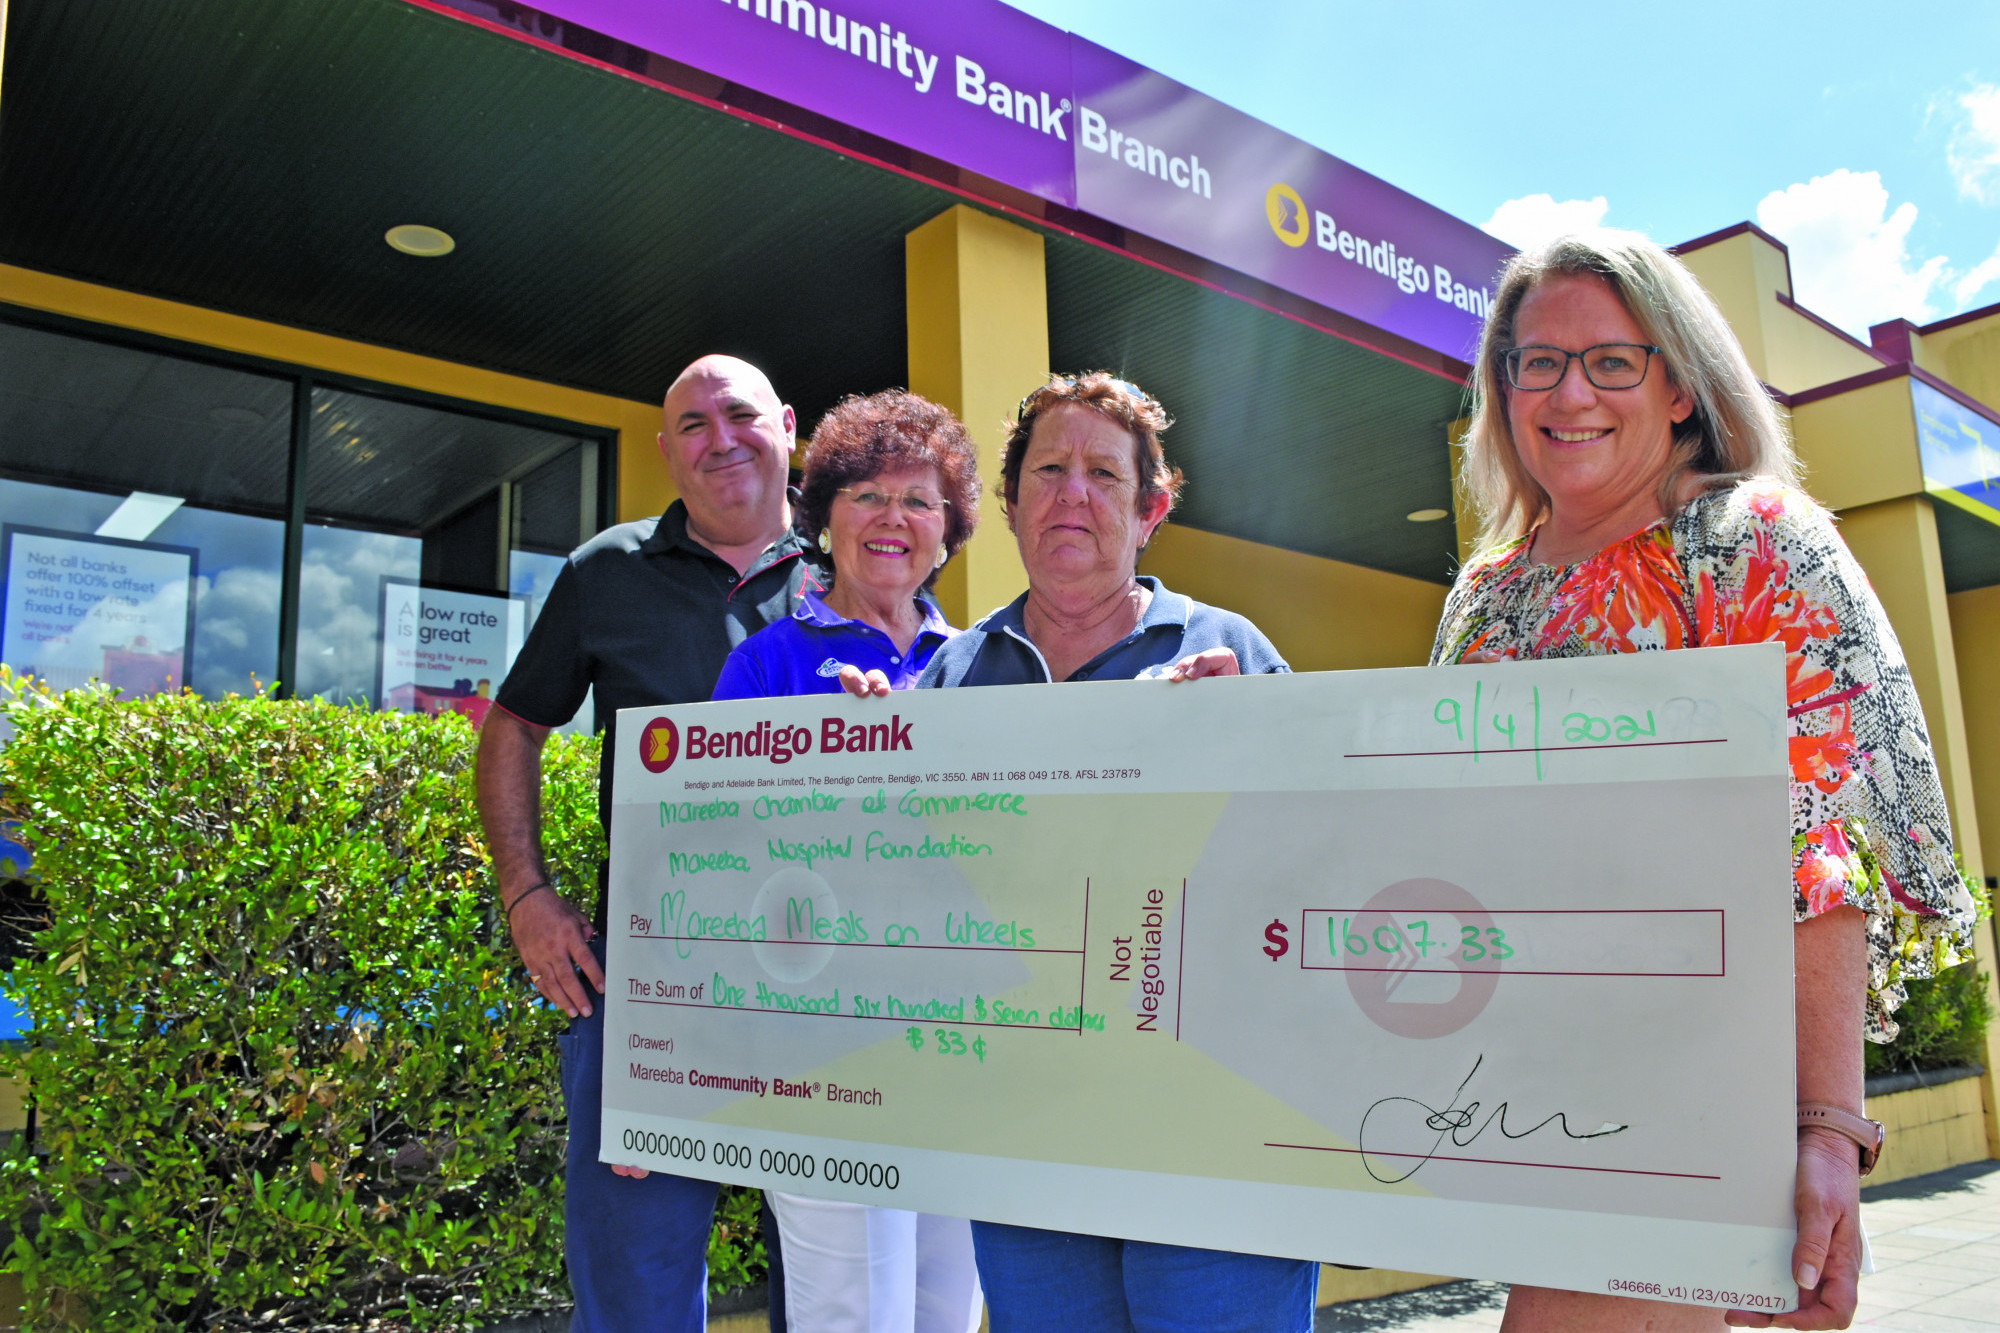 Mareeba Chamber of Commerce President Joe Moro, Mareeba Friends of the Hospital Foundation Board Member Robyn Boundy and Mareeba Meals on Wheels Co-ordinator Leanne Wallace with one of the $1,600 checks being presented by past Mareeba Business Women’s Club President Stacey Shaw